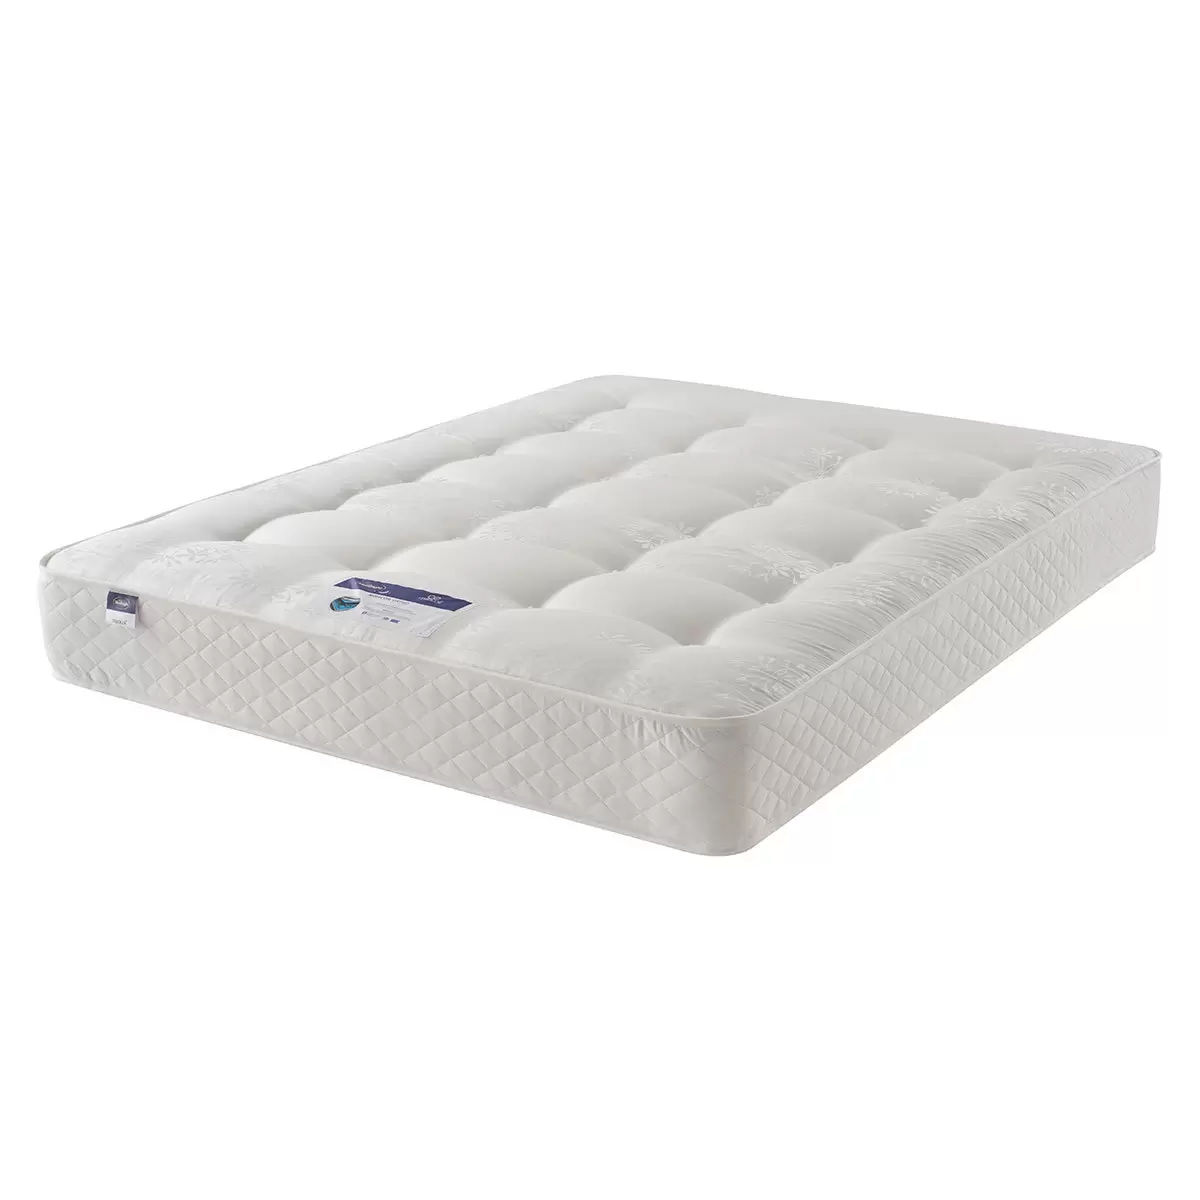 Silentnight Bexley Eco Miracoil Ortho Mattress & Divan in Grey, Double